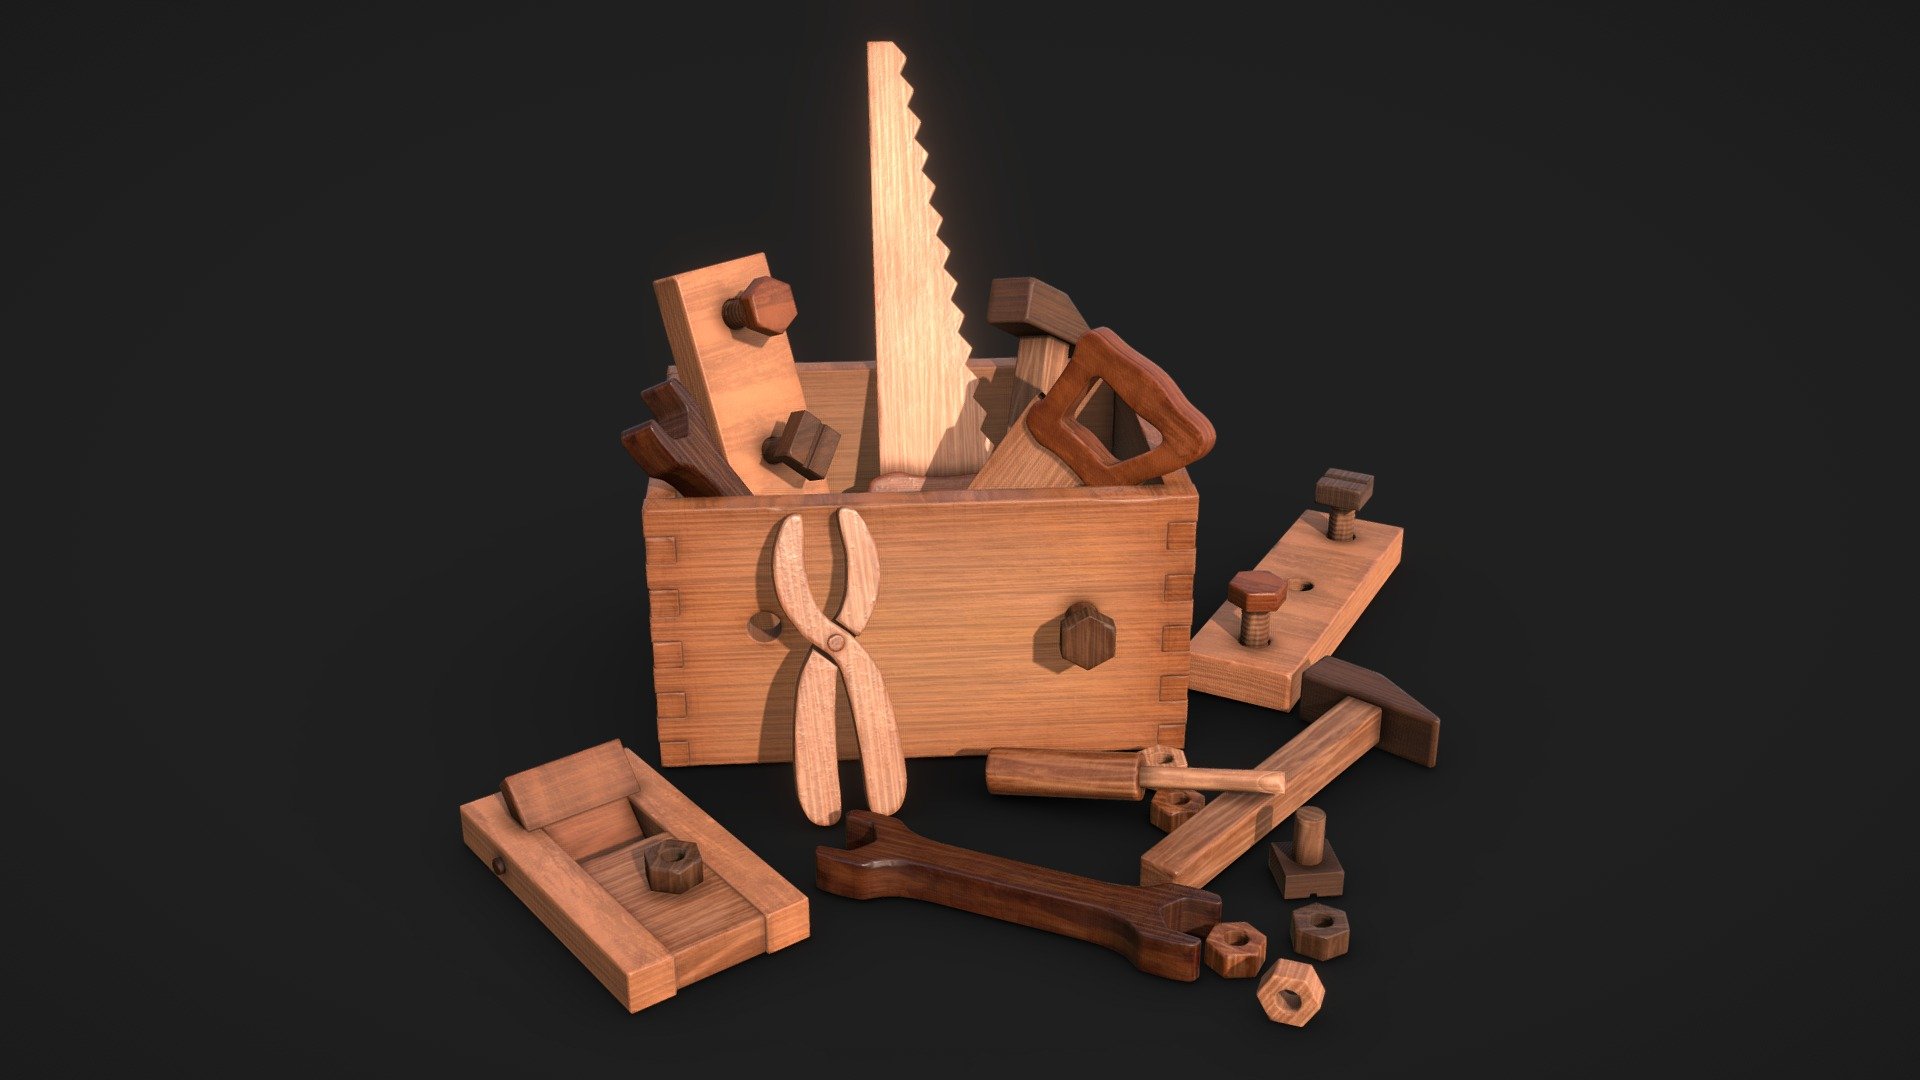 wooden toy kit for boys, contains different types of wooden instruments for hand work like; saw, hammer, screwdriver and exc. Will suit well in children's room visualisation

Technical specifications:

Close-up model

Optimized model

non-overlapping UV map

ready for animation

PBR textures 4K resolution: Normal, Roughness, Albedo, Ambient Occlusion, displacement  maps

Download package includes FBX and OBJ, which are applicable for 3ds Max, Maya, Unreal Engine, Unity, Blender.

Enjoy! - Wooden Instrument Toys Kit - Buy Royalty Free 3D model by U3DA (@unreal.artists) 3d model